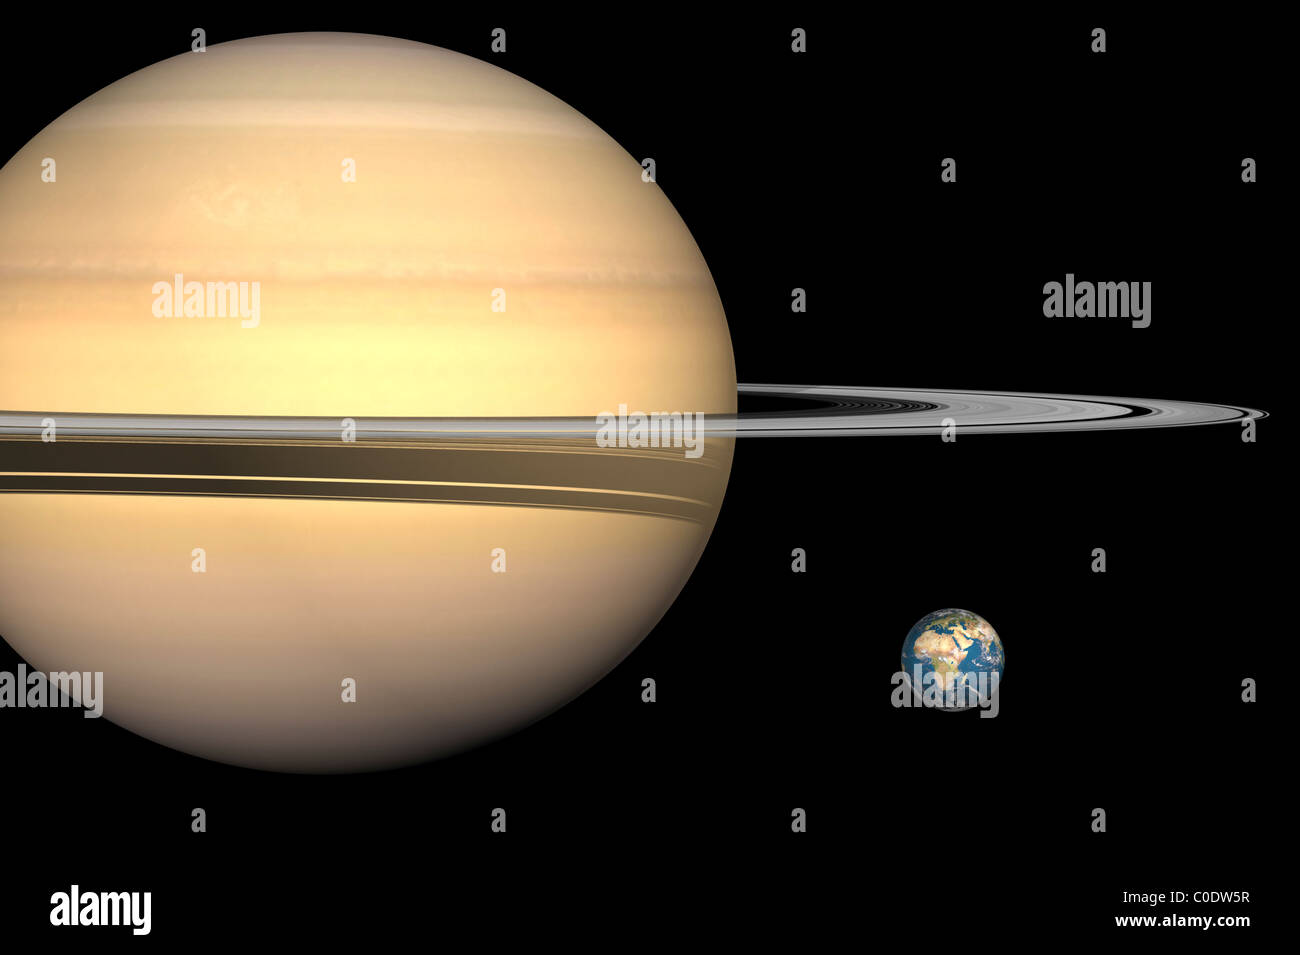 Illustration of Saturn and Earth to scale. Stock Photo